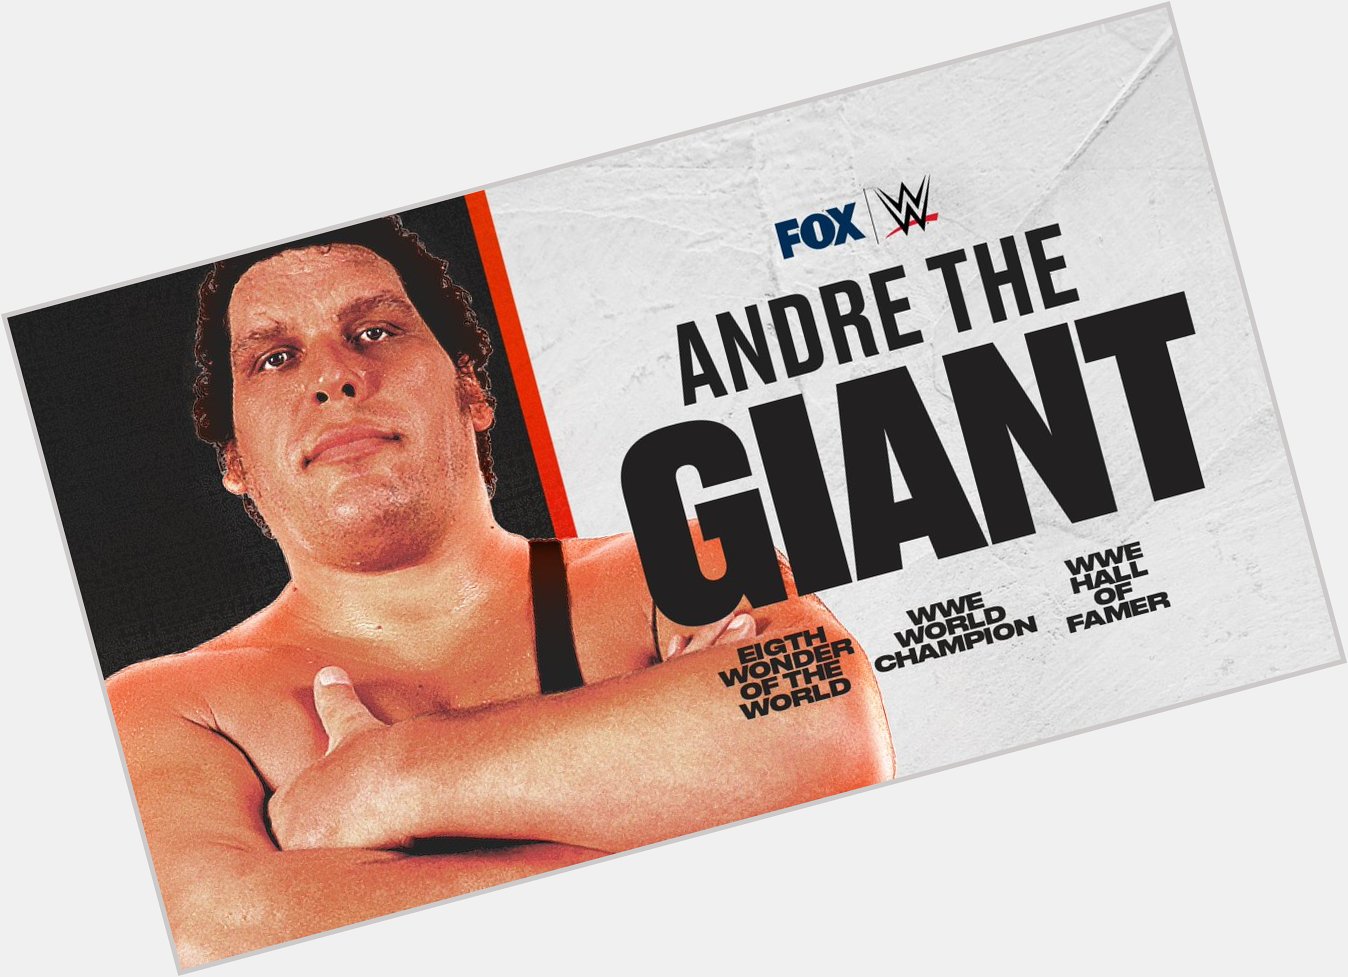 Today we honor one of the most legendary figures in history. 

Happy Birthday to the great Andre The Giant! 